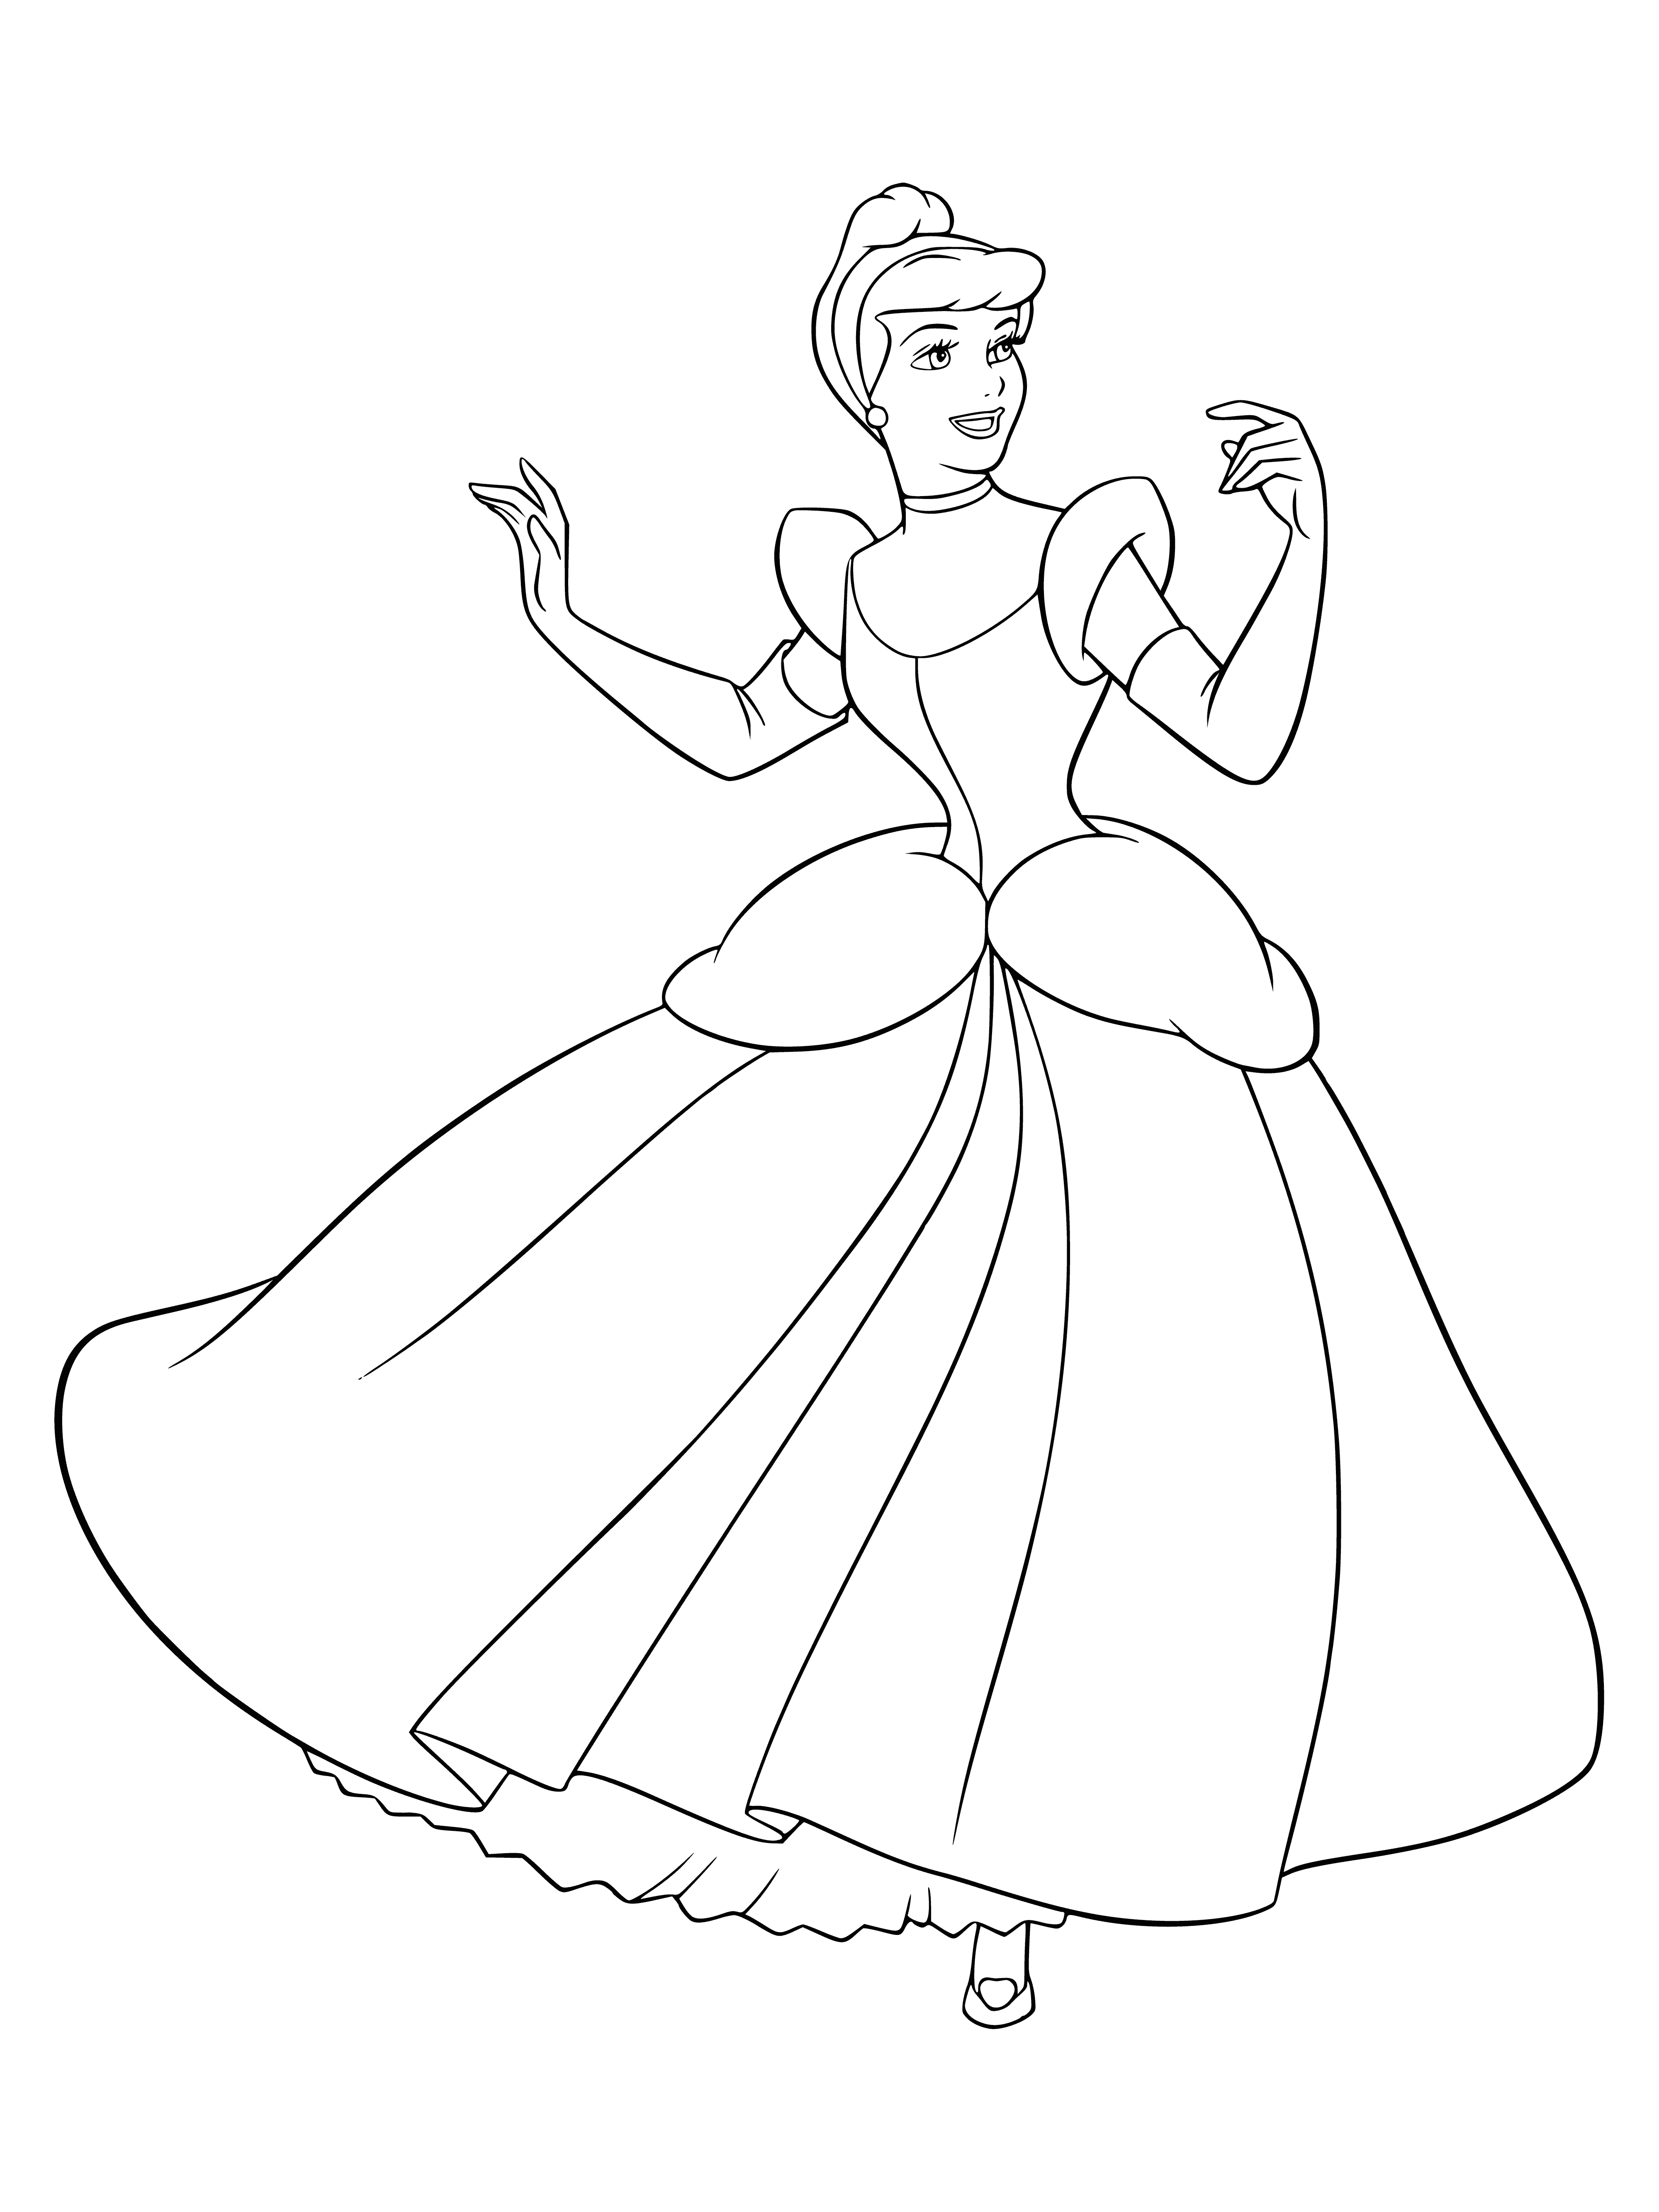 coloring page: Girl dressed in blue happy in front of castle, long blonde hair. #beautiful #happiness